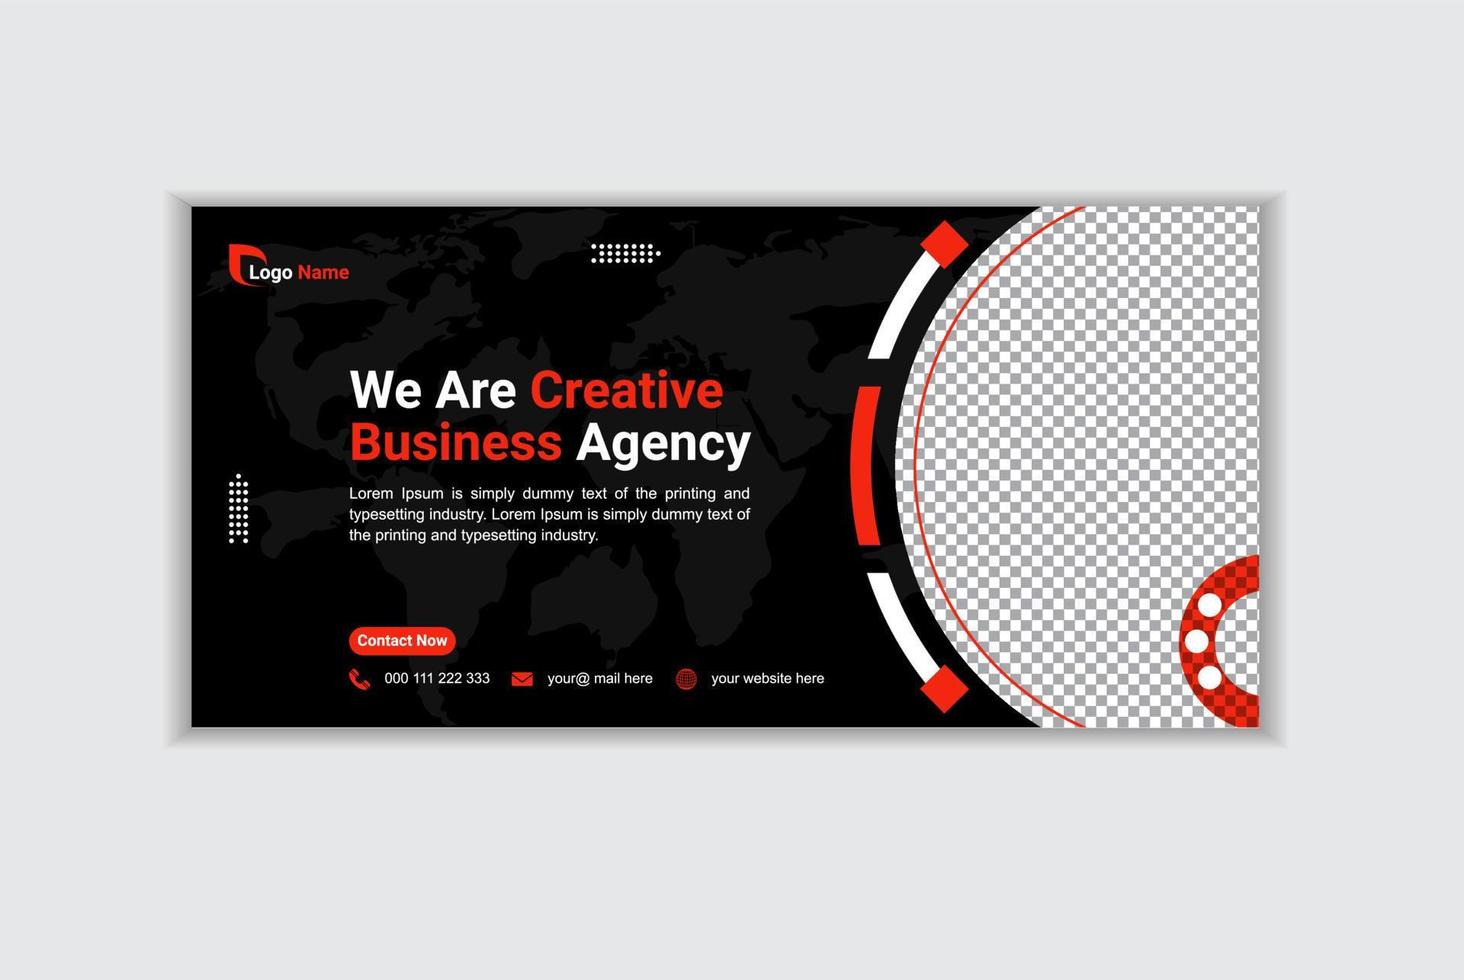 Creative corporate business web banner design and landing page social media cover or thumbnail template vector